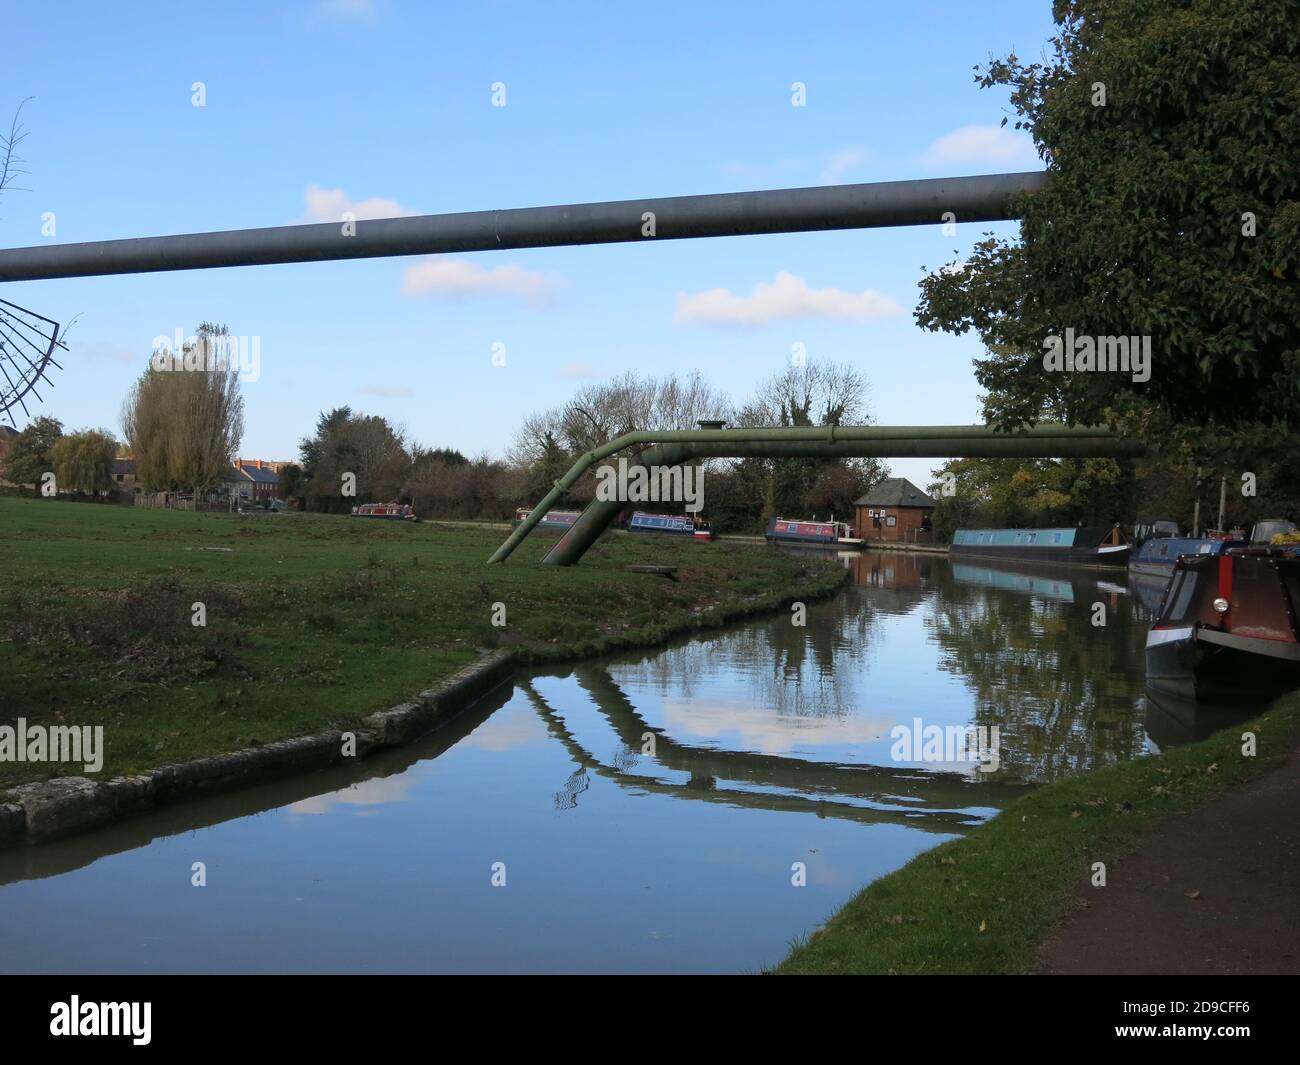 Metal pipe bridges carrying utilities across the Grand Union Canal near the village of Cosgrove, high enough to allow narrowboats to pass underneath. Stock Photo